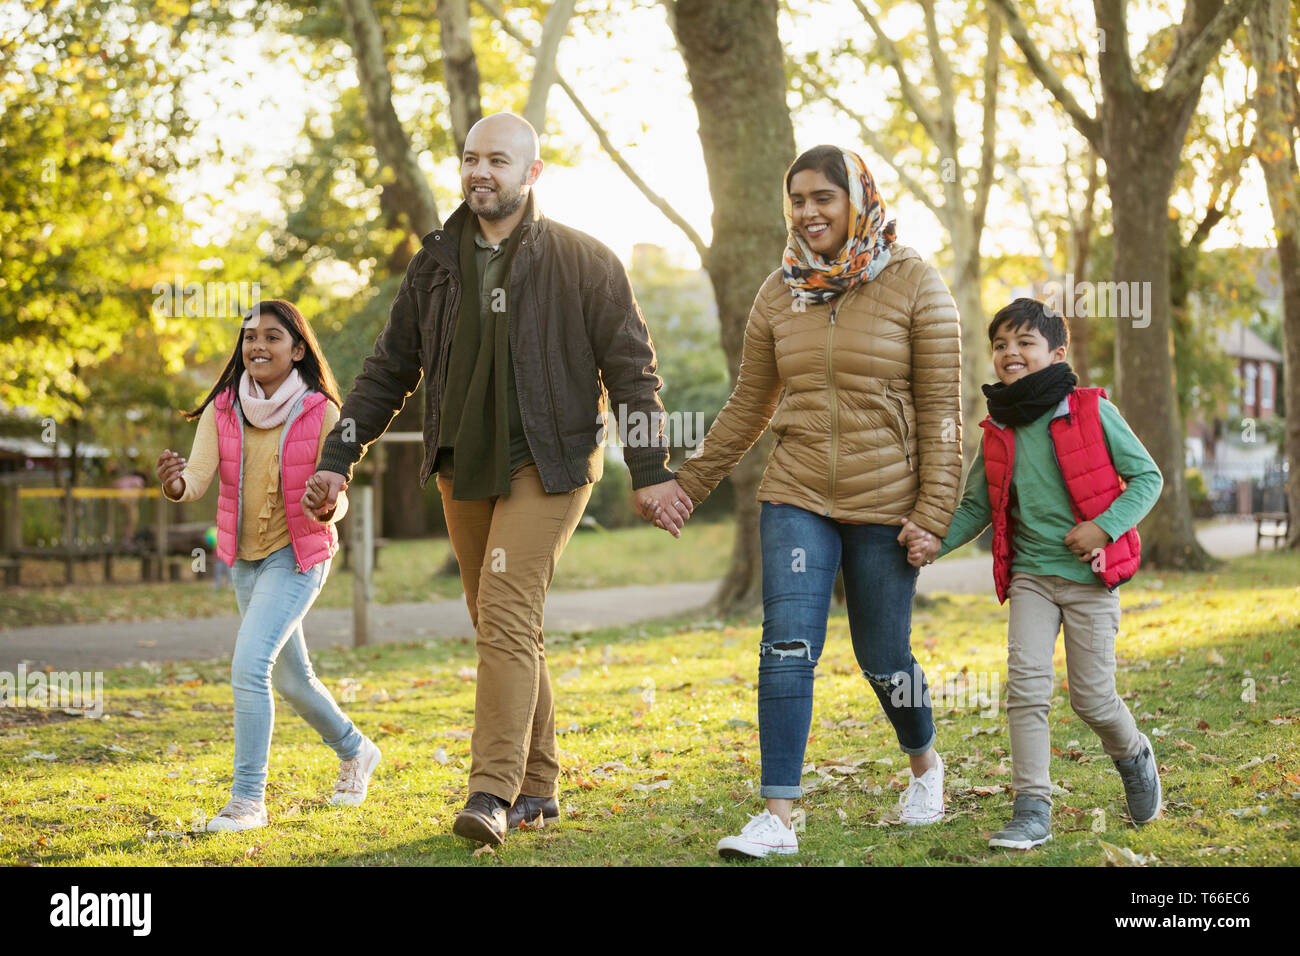 Muslim family holding hands, walking in autumn park Stock Photo